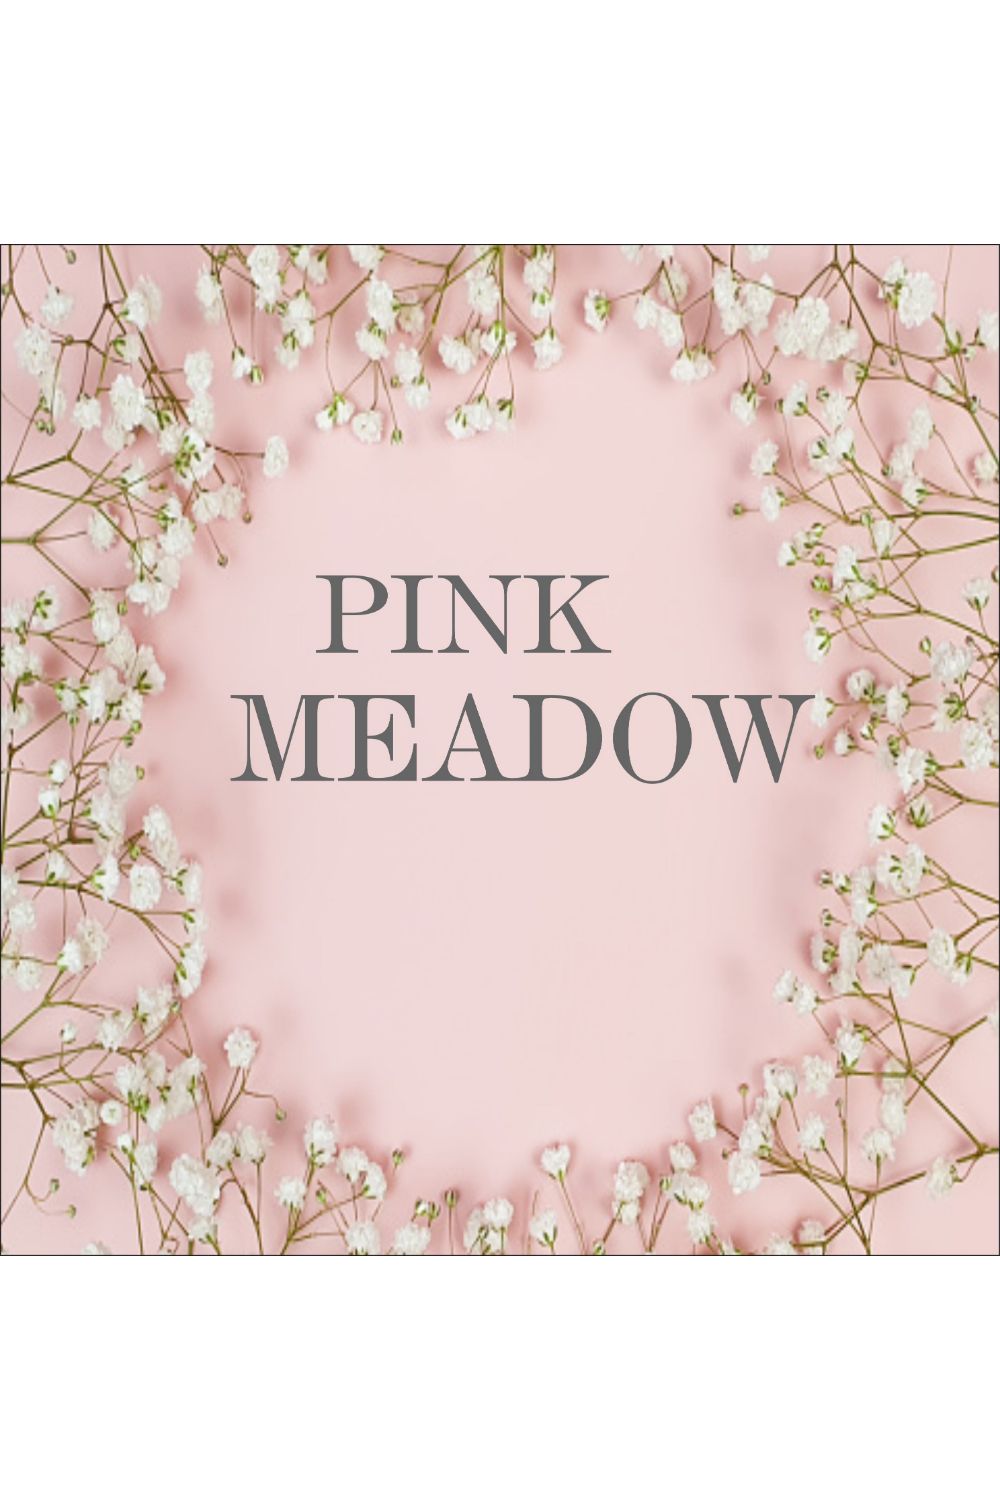 Pink meadow flower pinterest preview image.